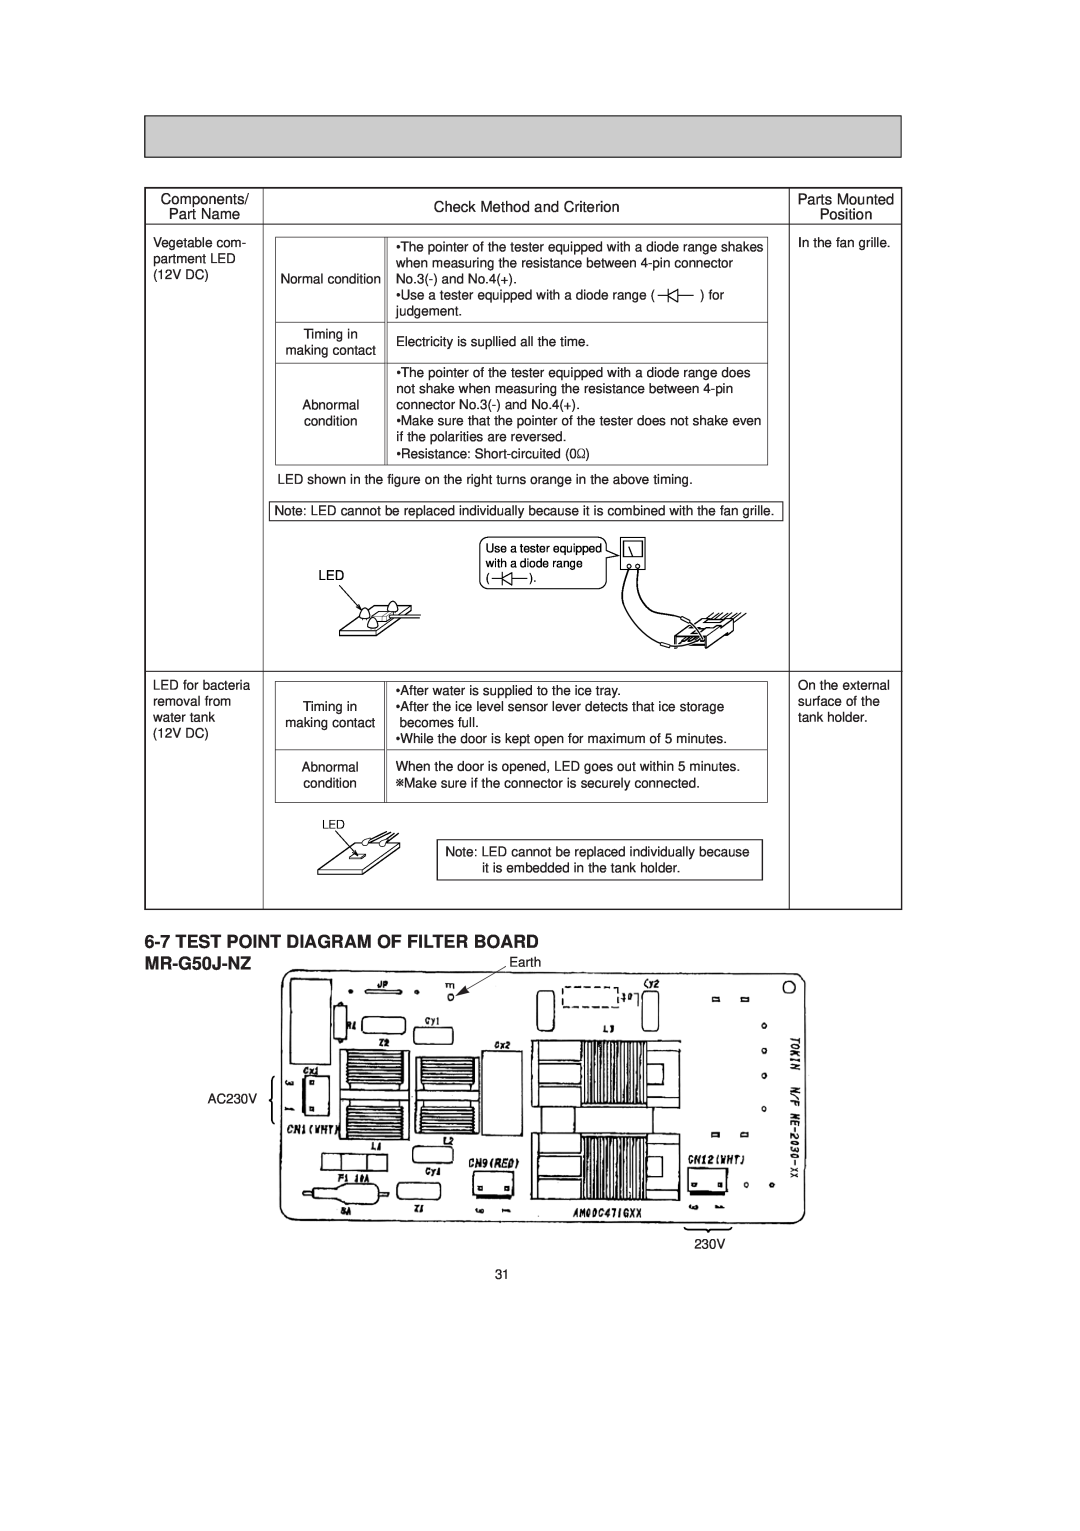 Mitsubishi Electronics MR-G50J-SS-NZ Test Point Diagram Of Filter Board, MR-G50J-NZ, Components, Parts Mounted, Part Name 